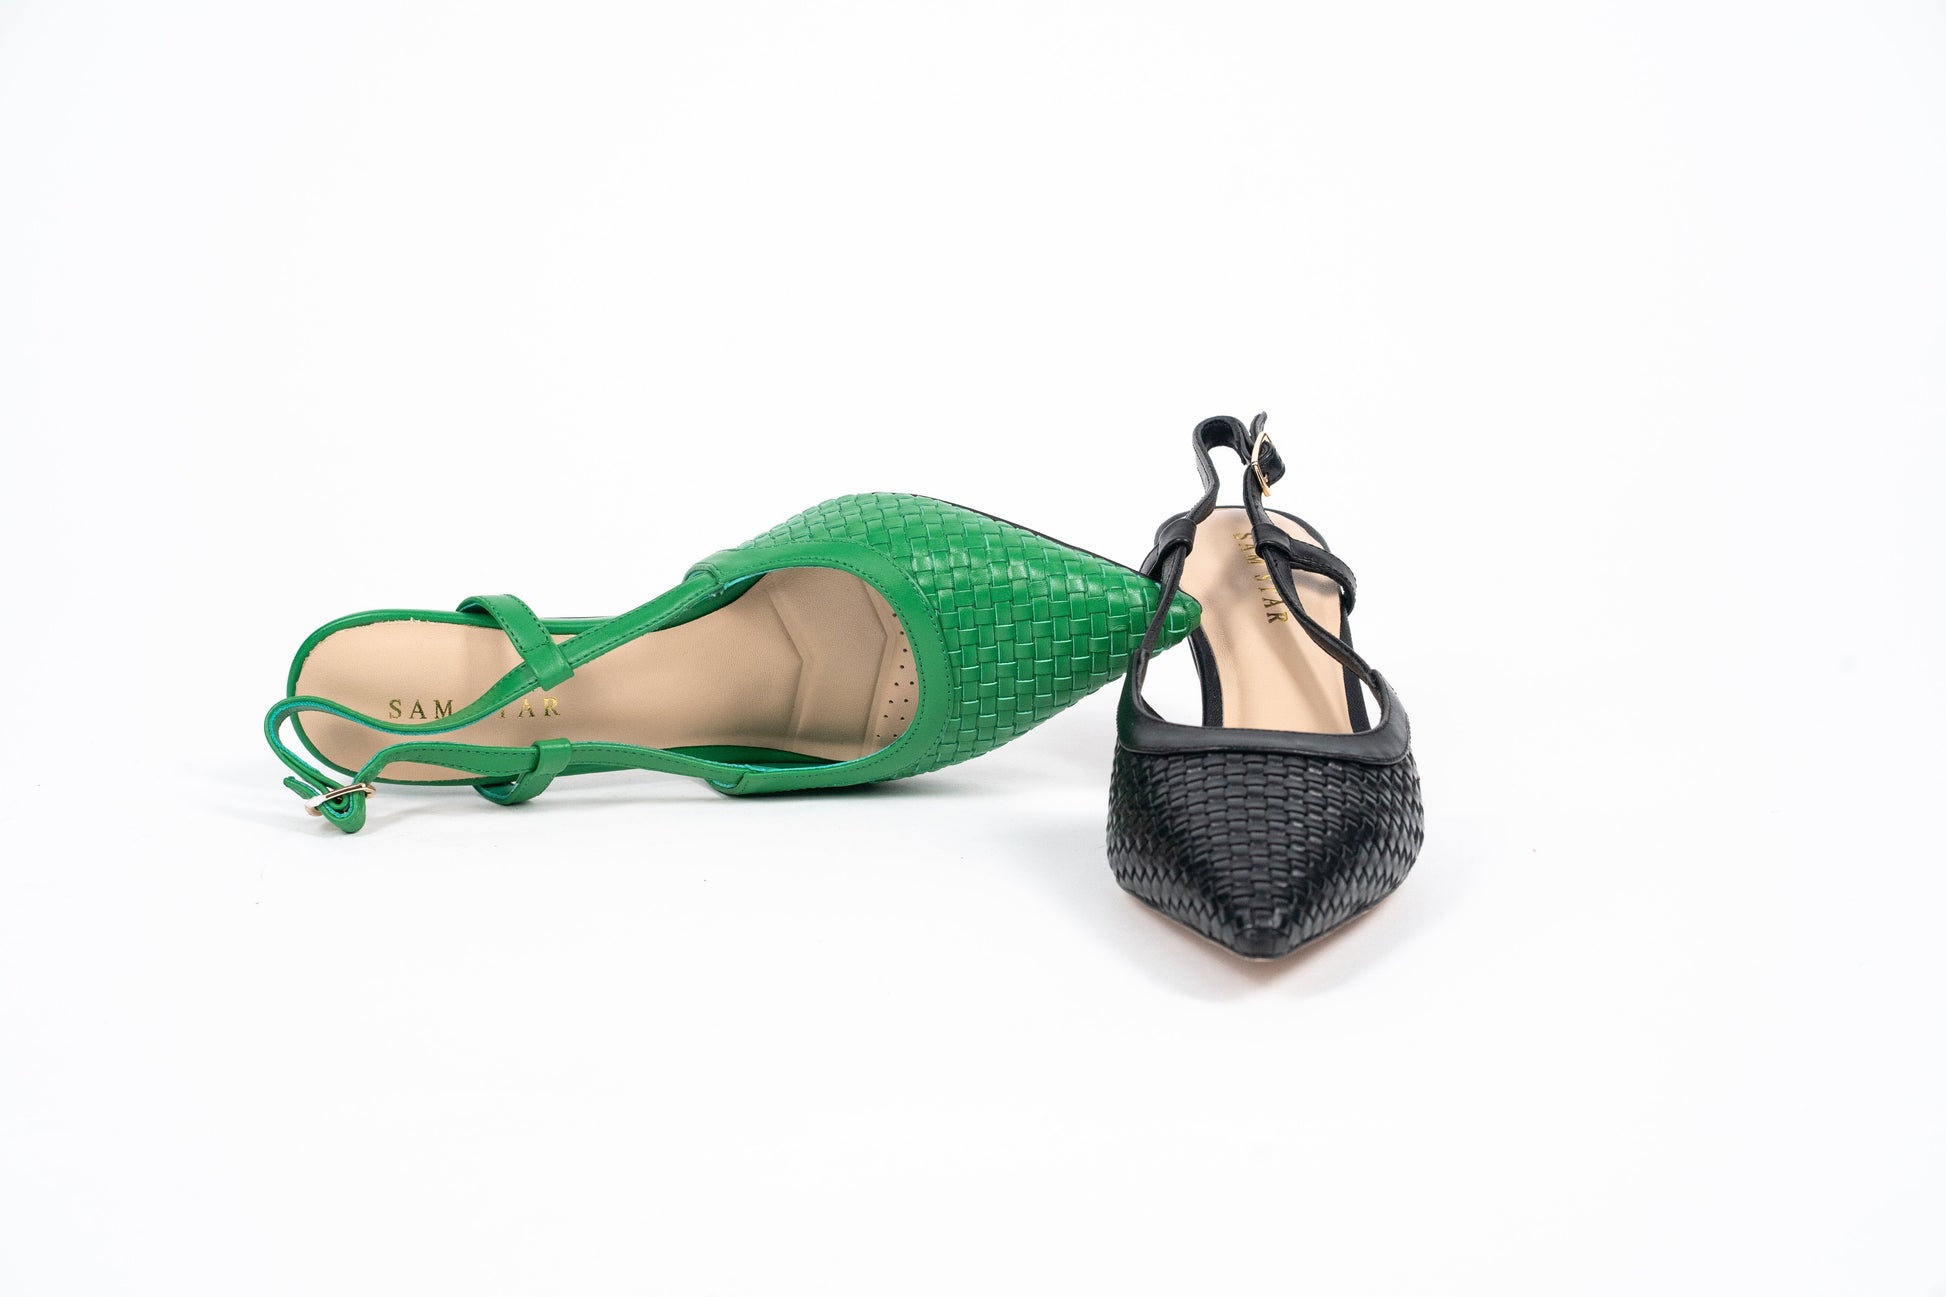 SS23010 Leather woven court shoes - Green (New Arrival) ladies shoes Sam Star shoes 